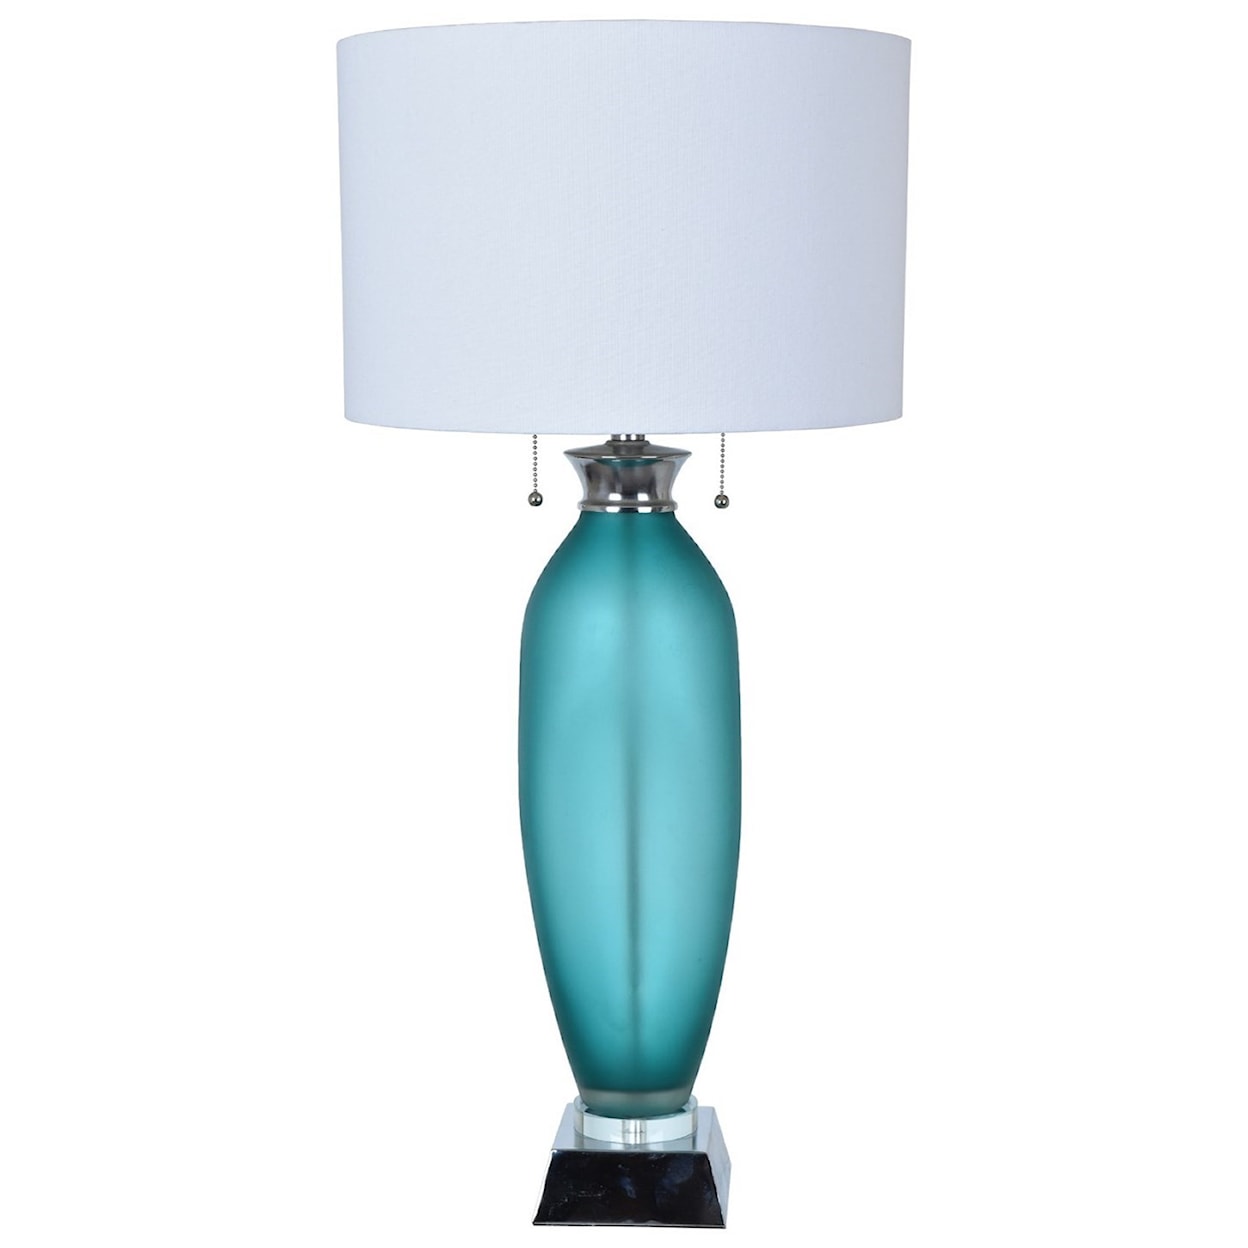 Crestview Collection Lighting Shara Table Lamp